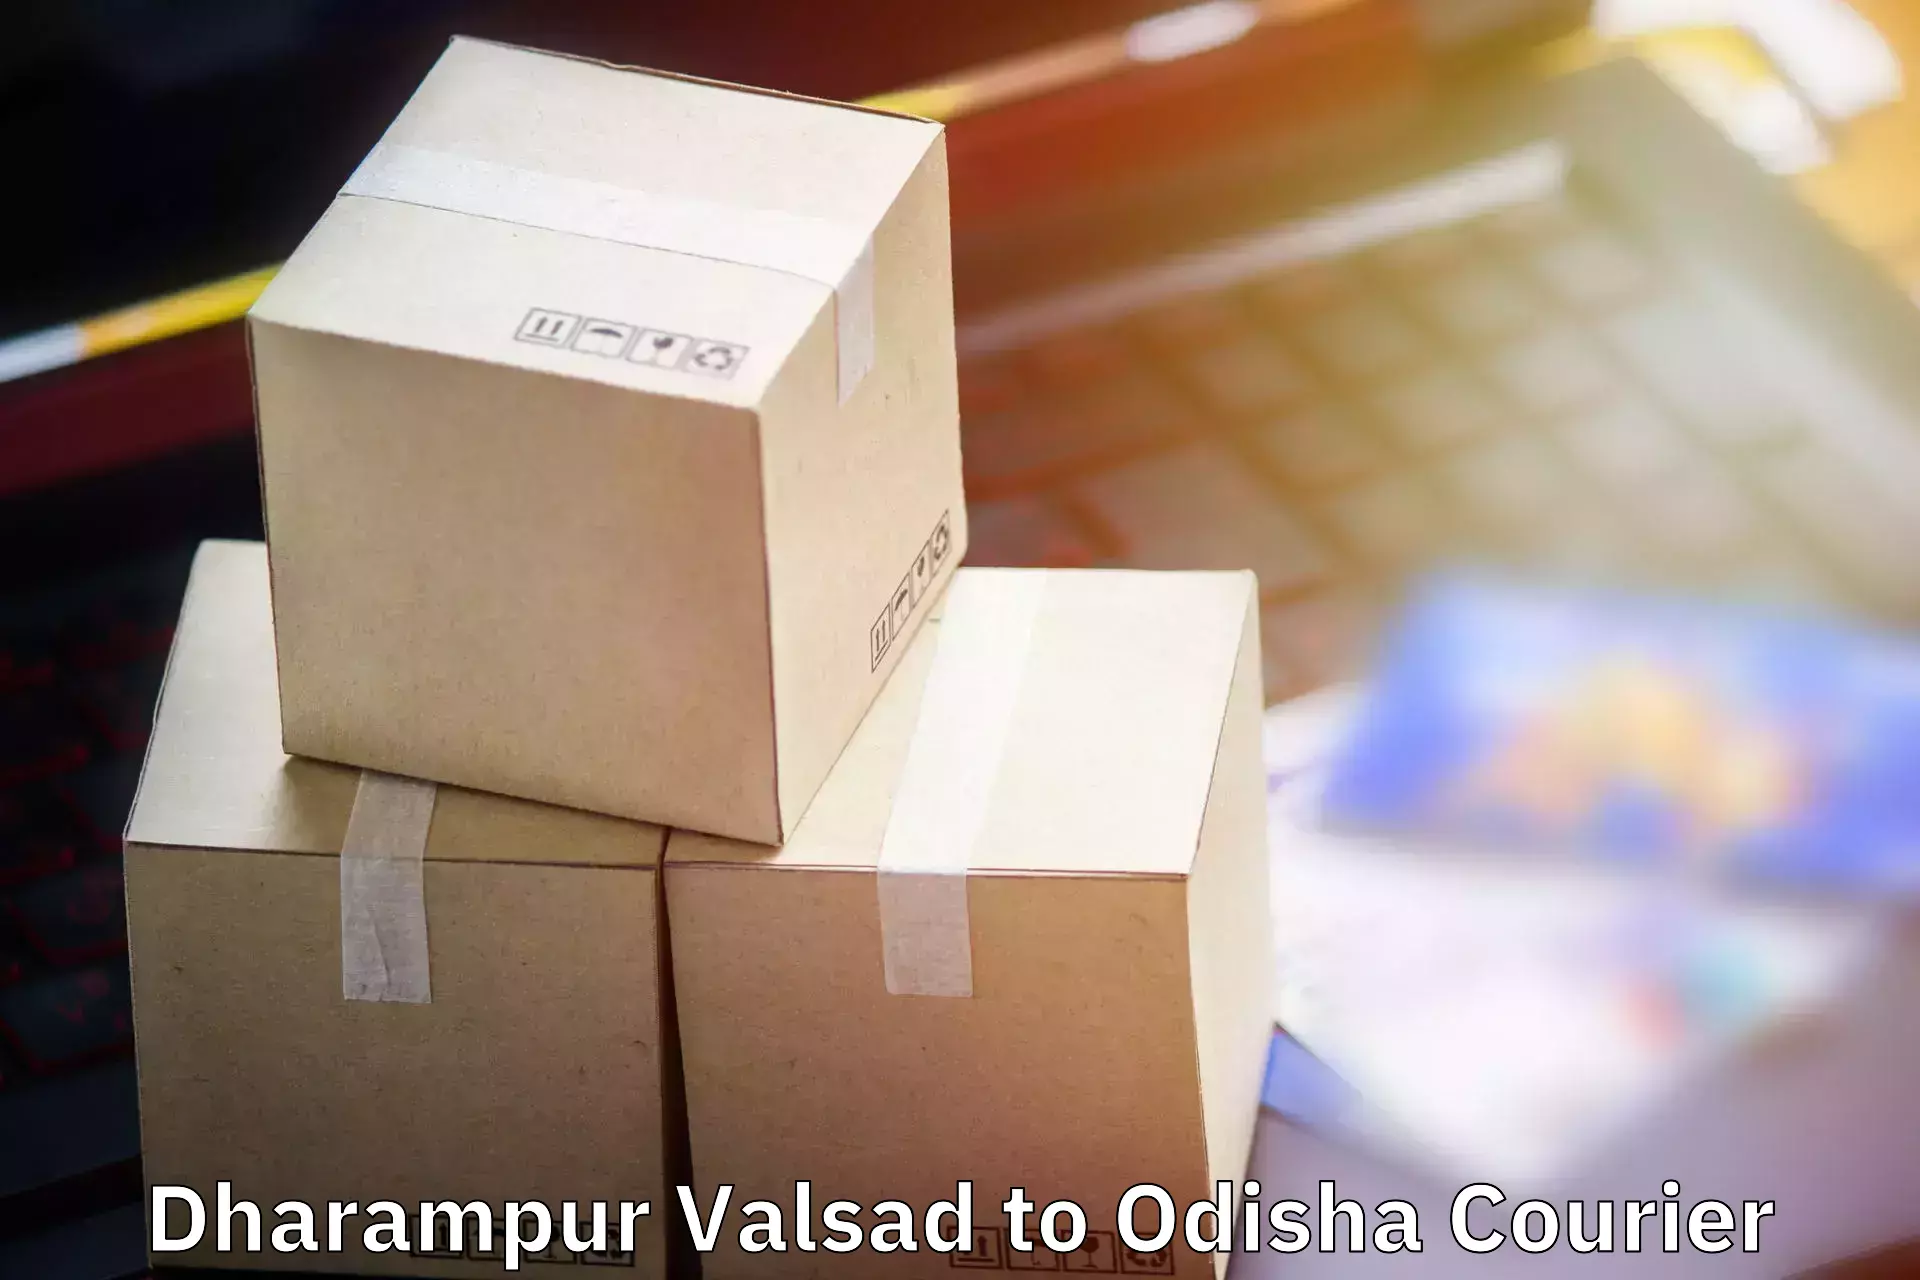 Luggage delivery system Dharampur Valsad to Baisinga